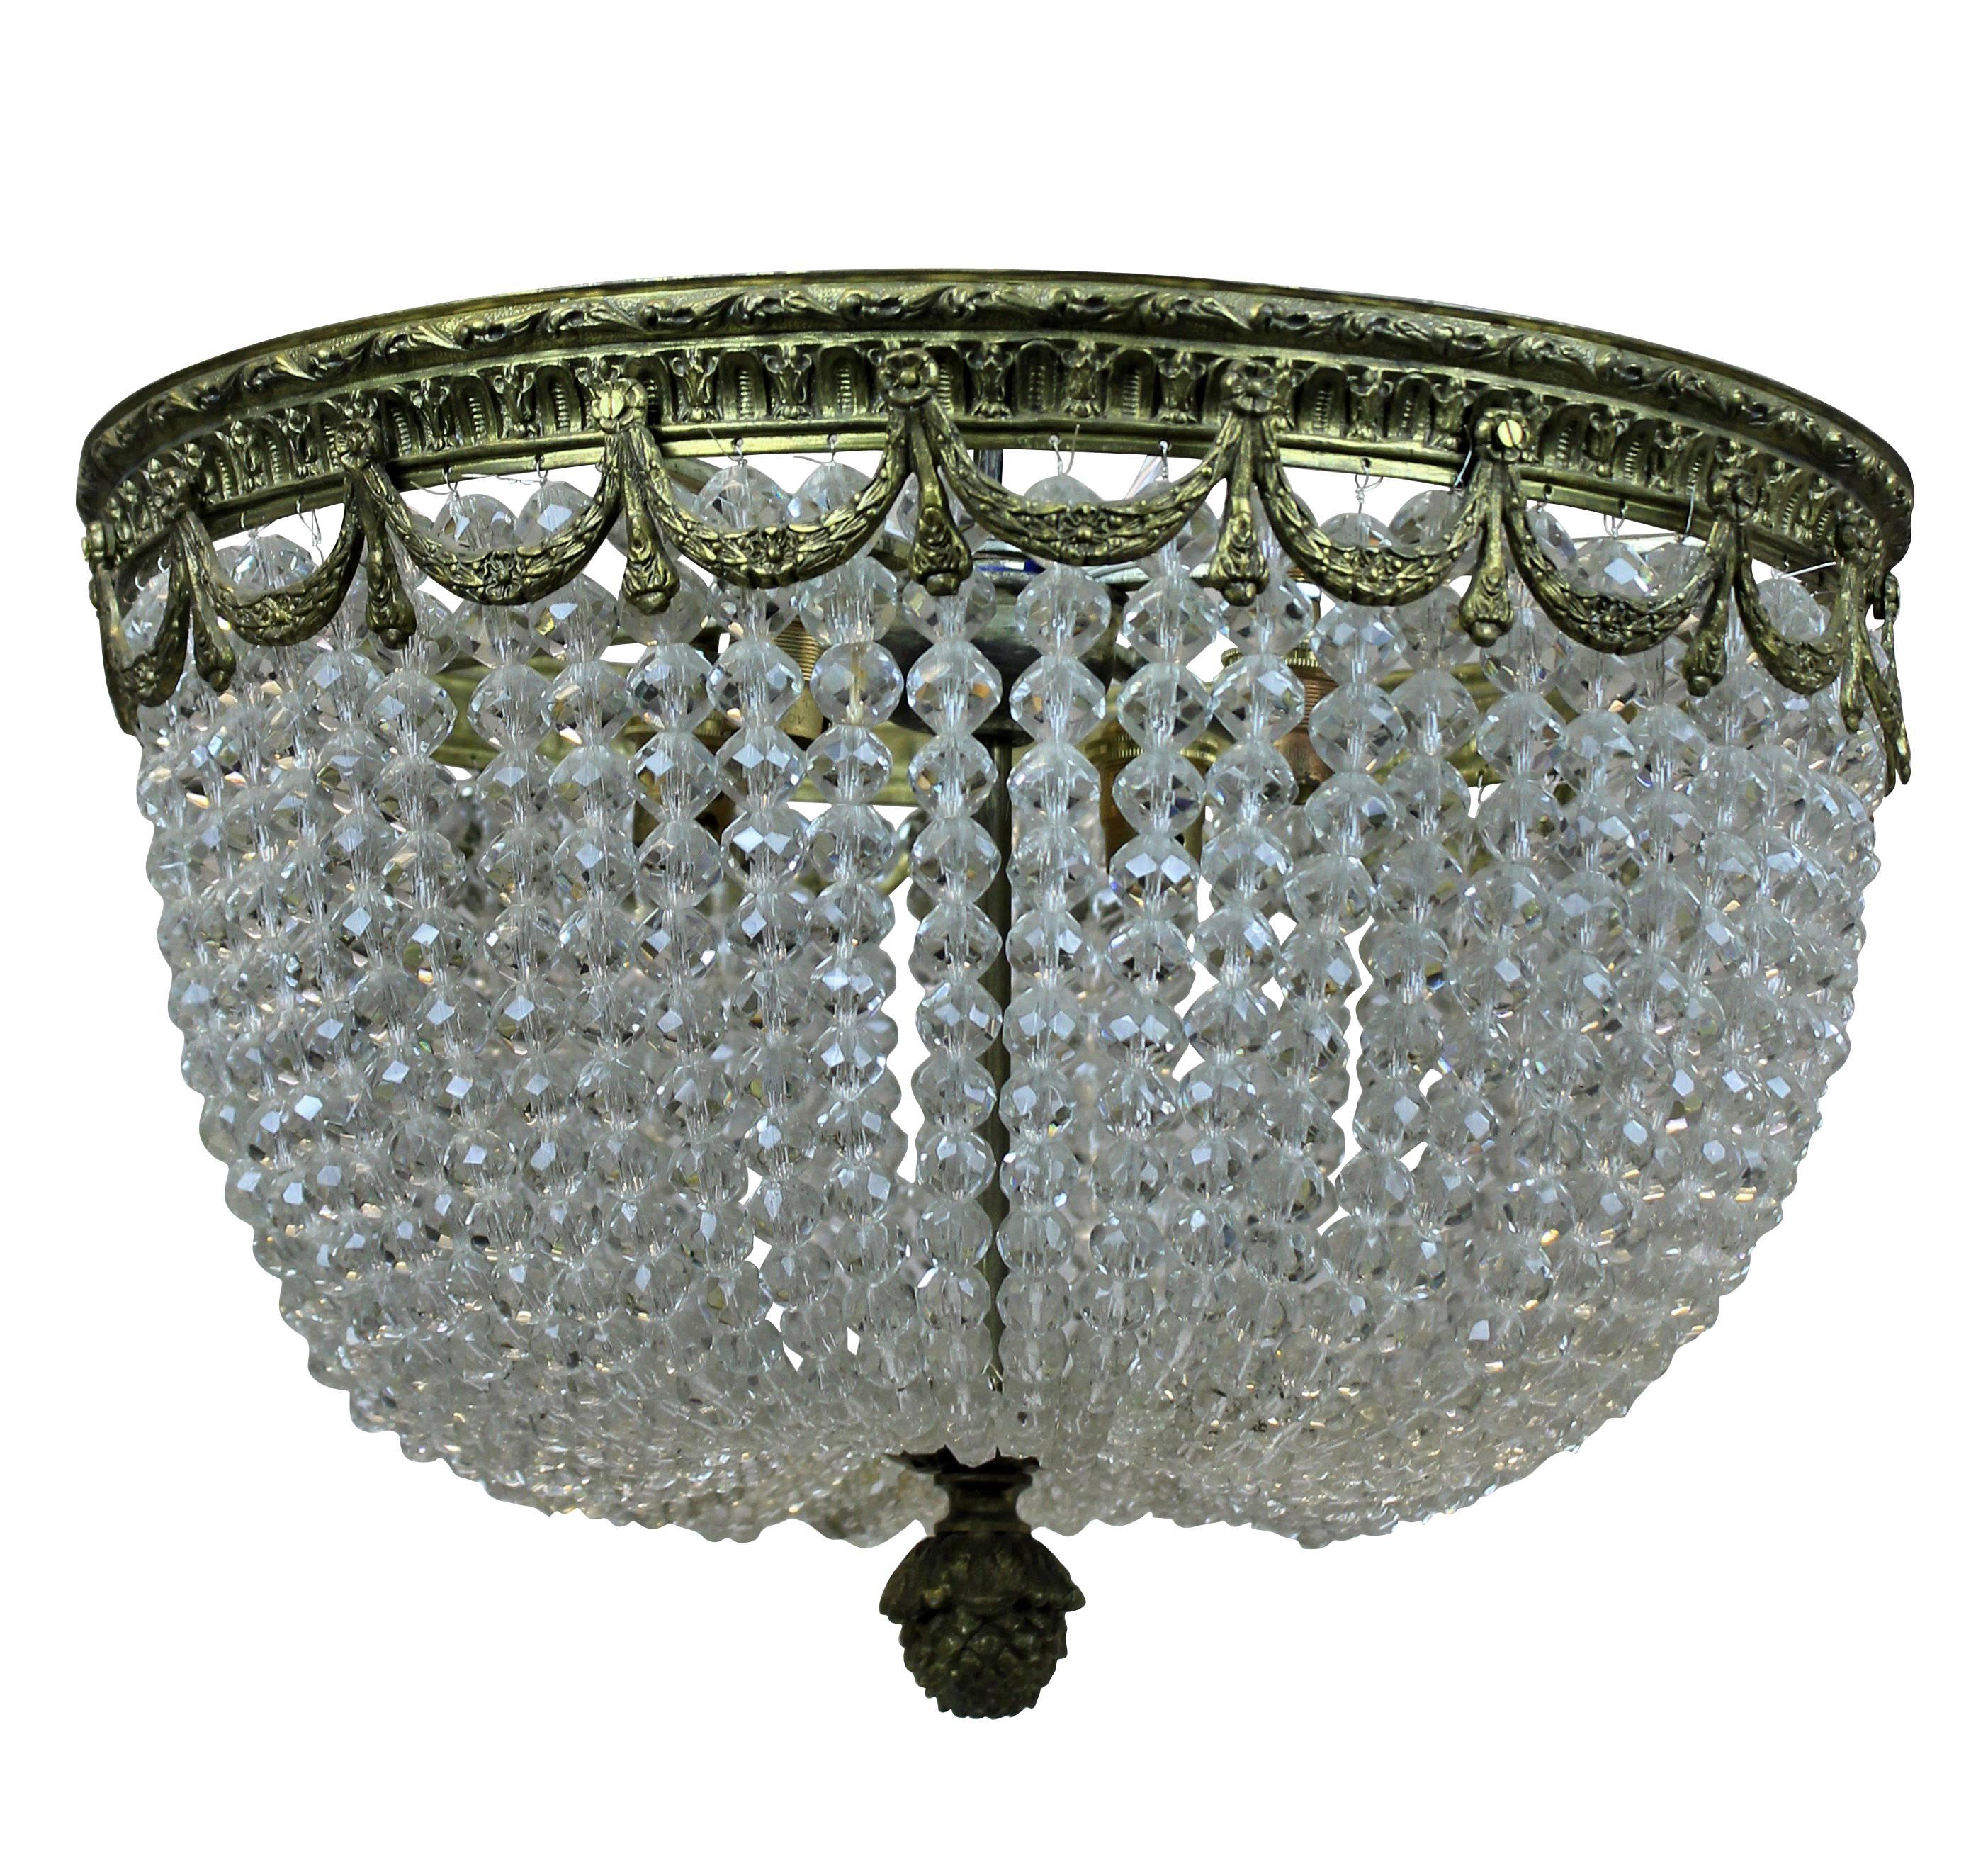 A pair of French 'bag' chandeliers in gilt bronze and cut-glass beads. Ideal for low ceilings.
  